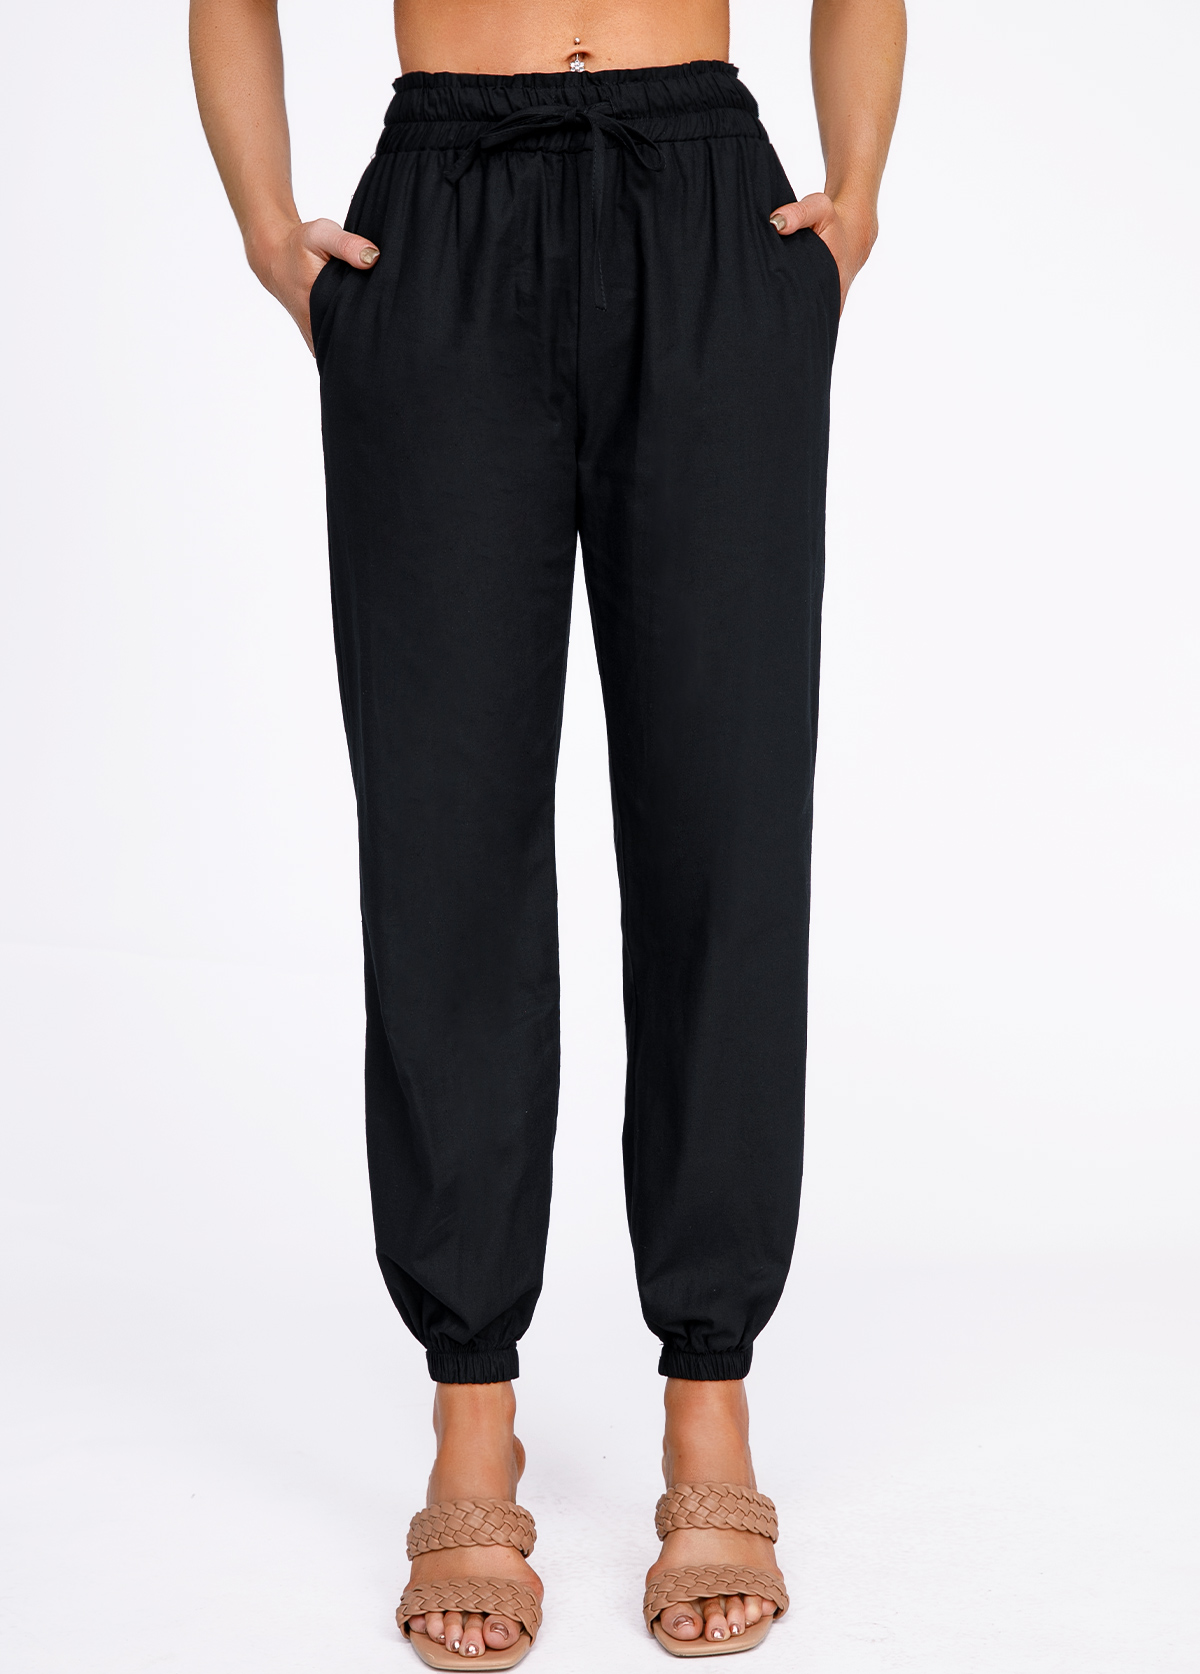 Black Drawstring Belted High Waisted Pants